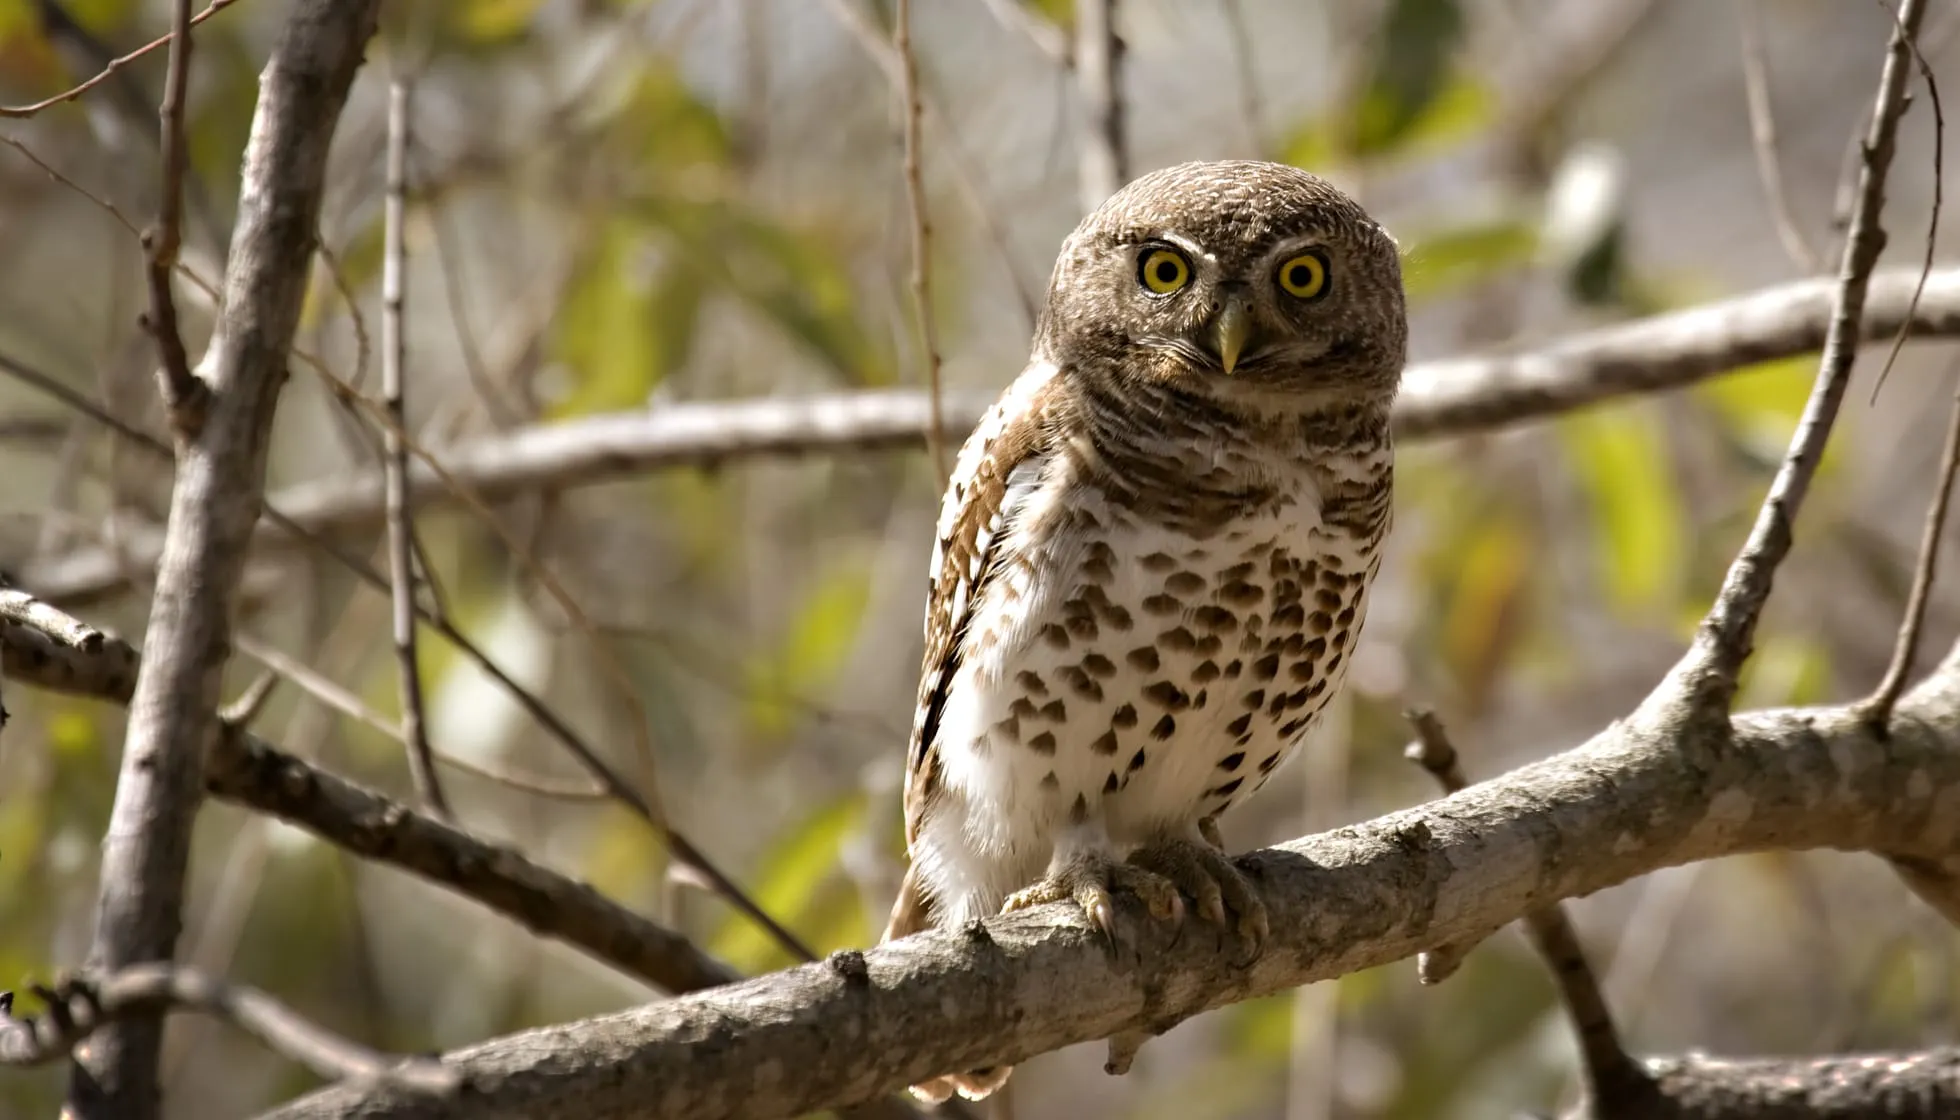  Pearl Spotted Owlet perched on a tree